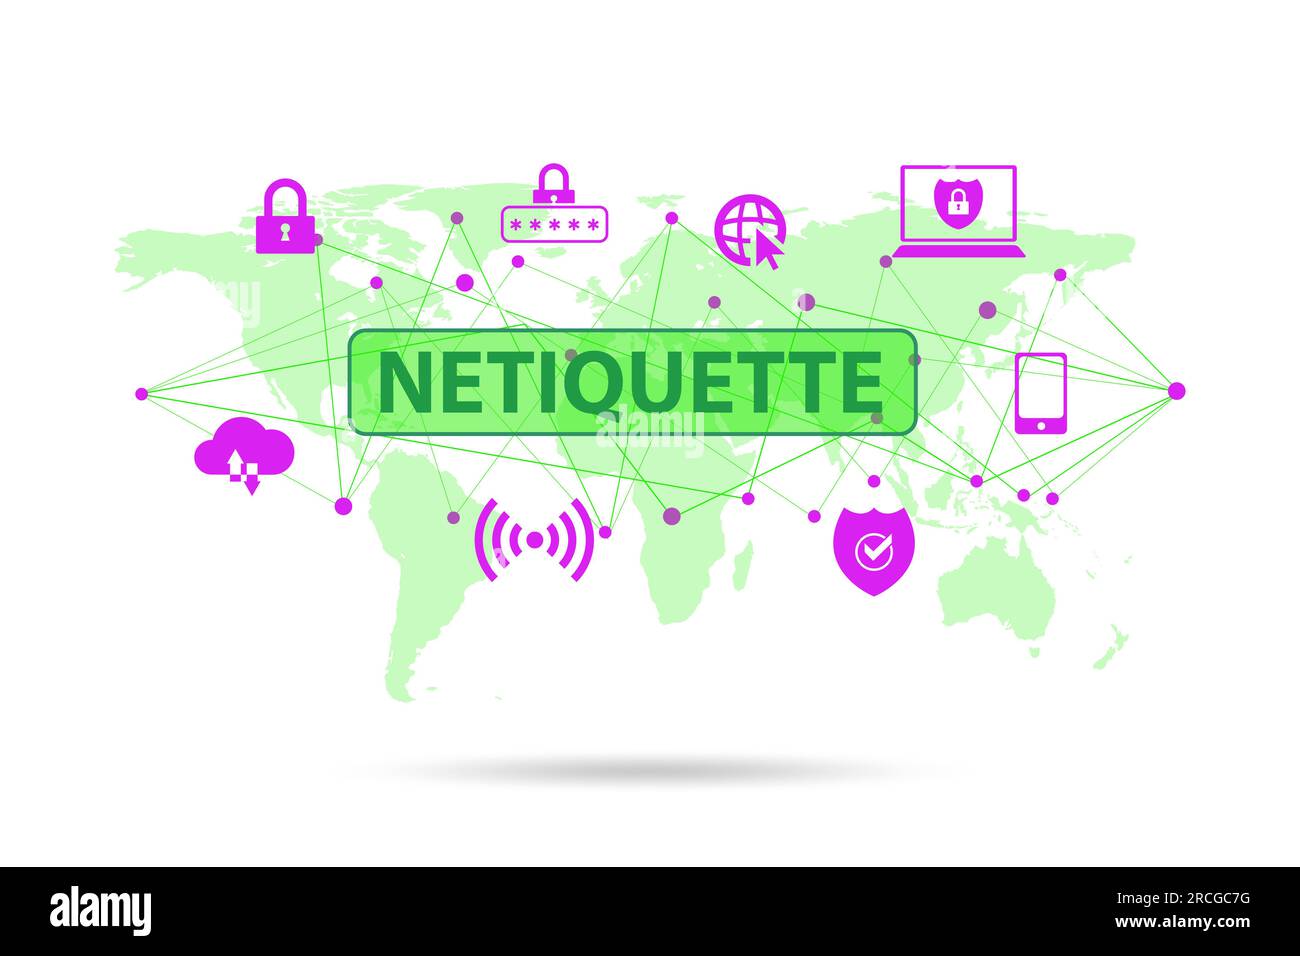 Concept of the etiquette and netiquette Stock Photo